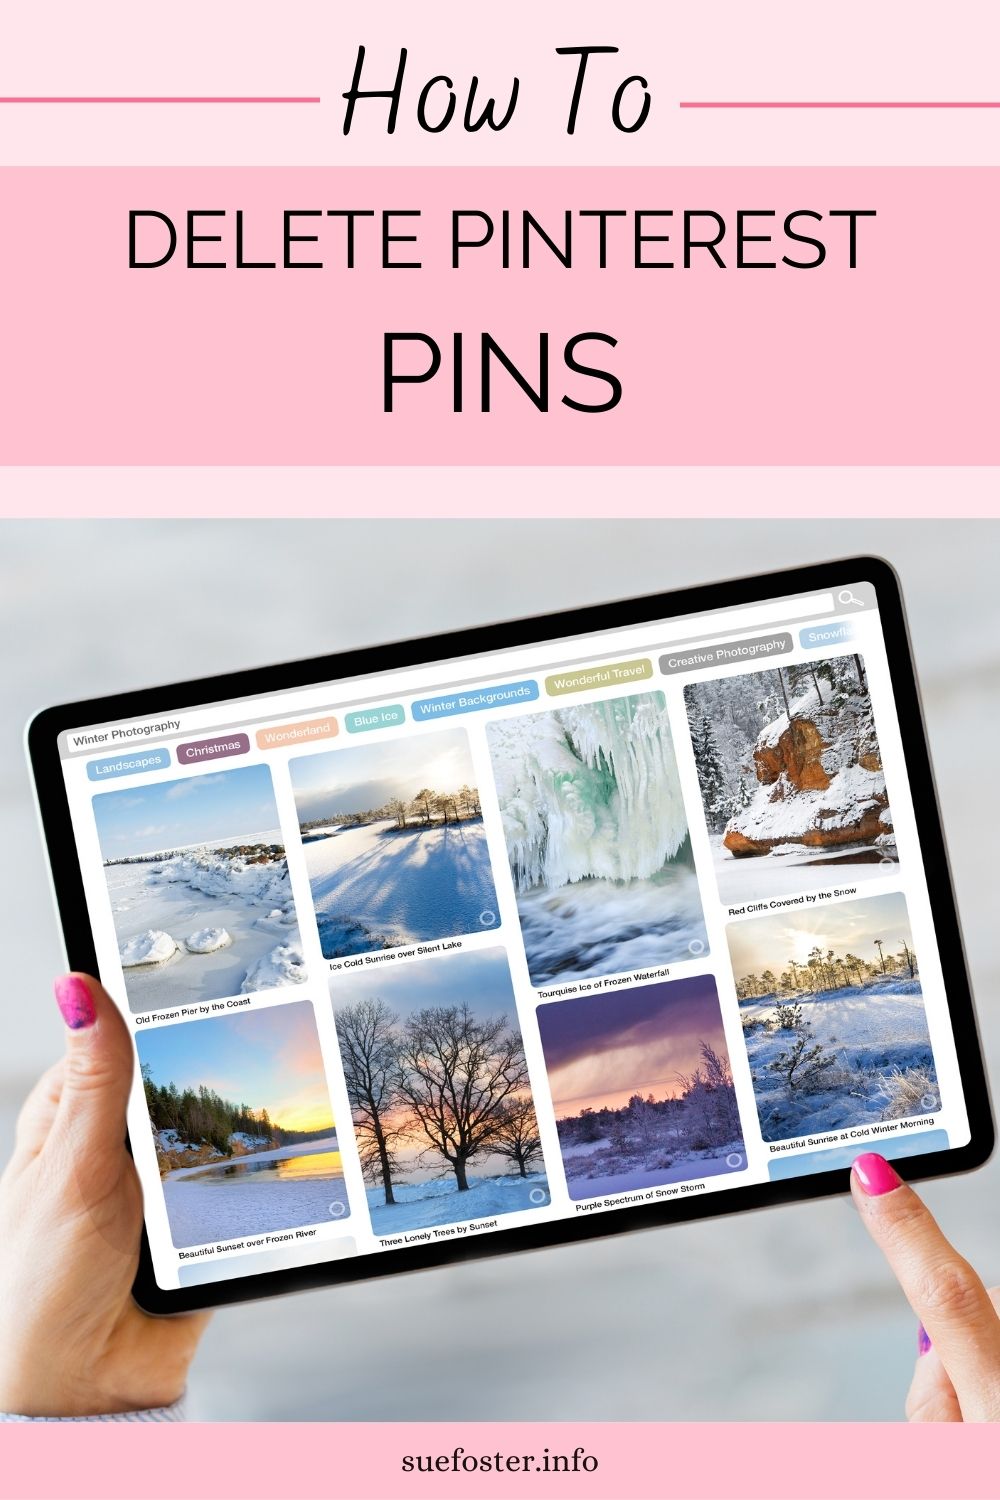 This post is a quick guide on how to delete Pinterest pins, for beginners who aren't that familiar with the platform, and shows how to delete pins individually and in bulk.